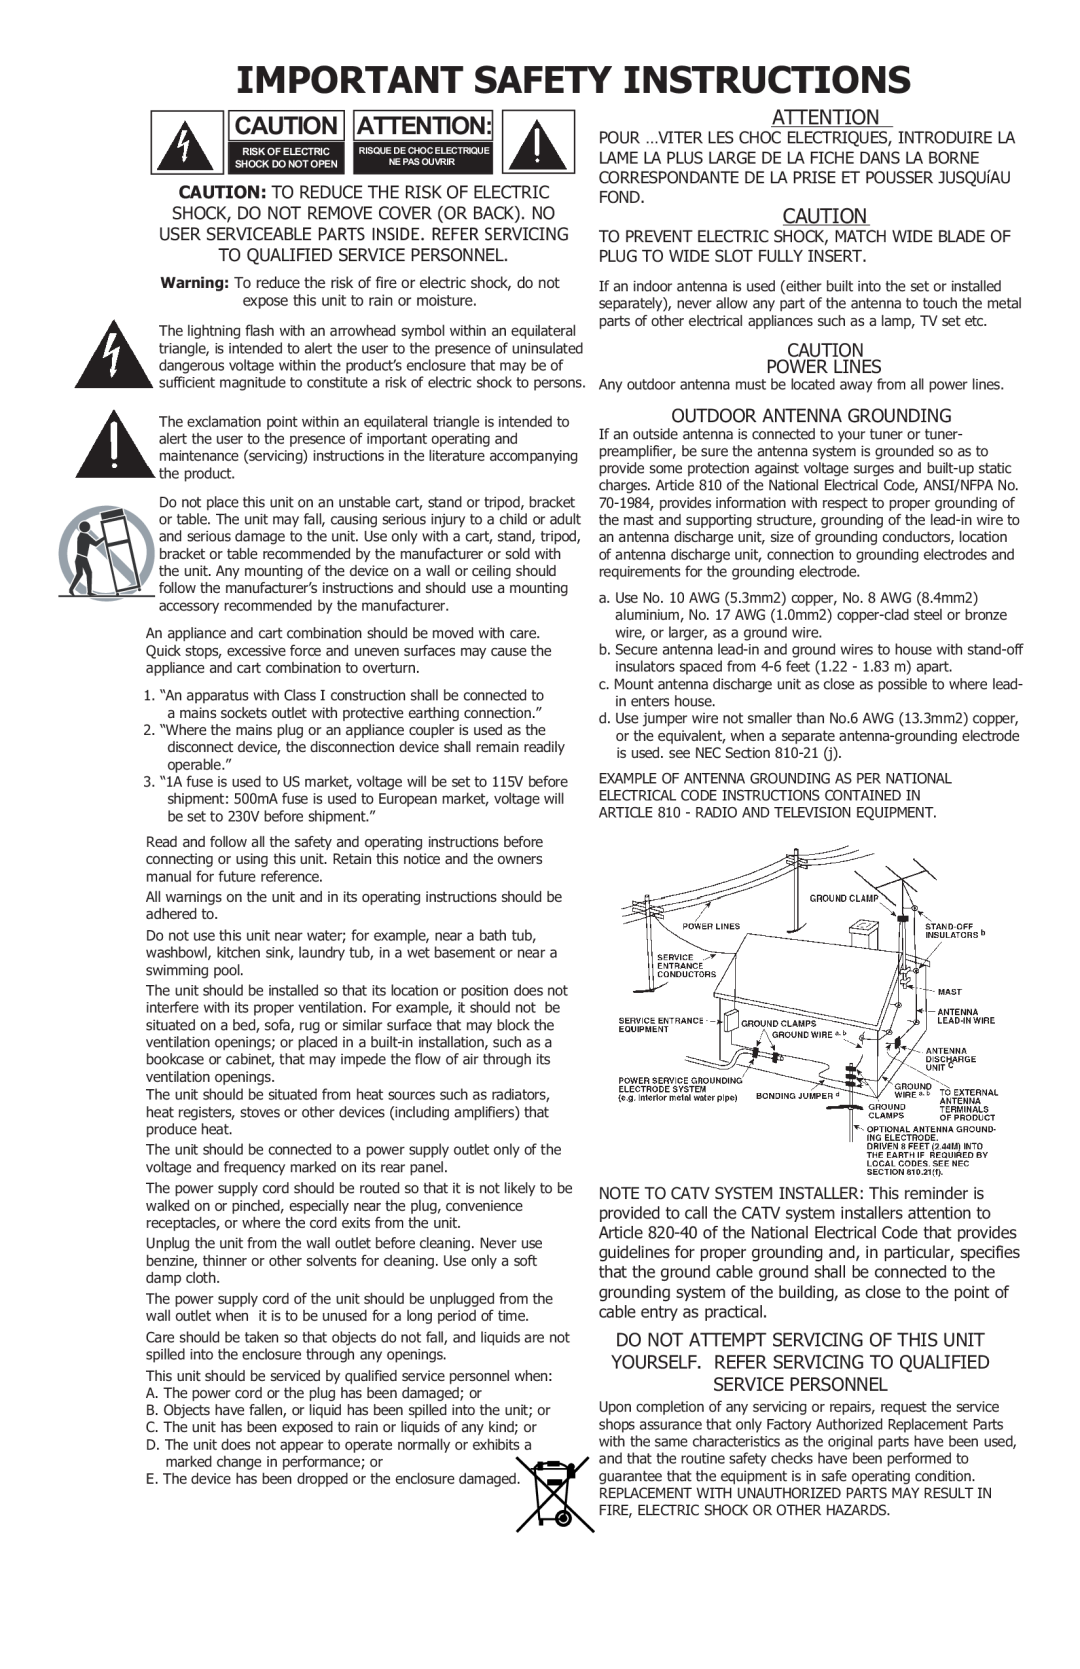 KRK G2 manual Important Safety Instructions, Cautionattention, Power Lines, Outdoor Antenna Grounding 